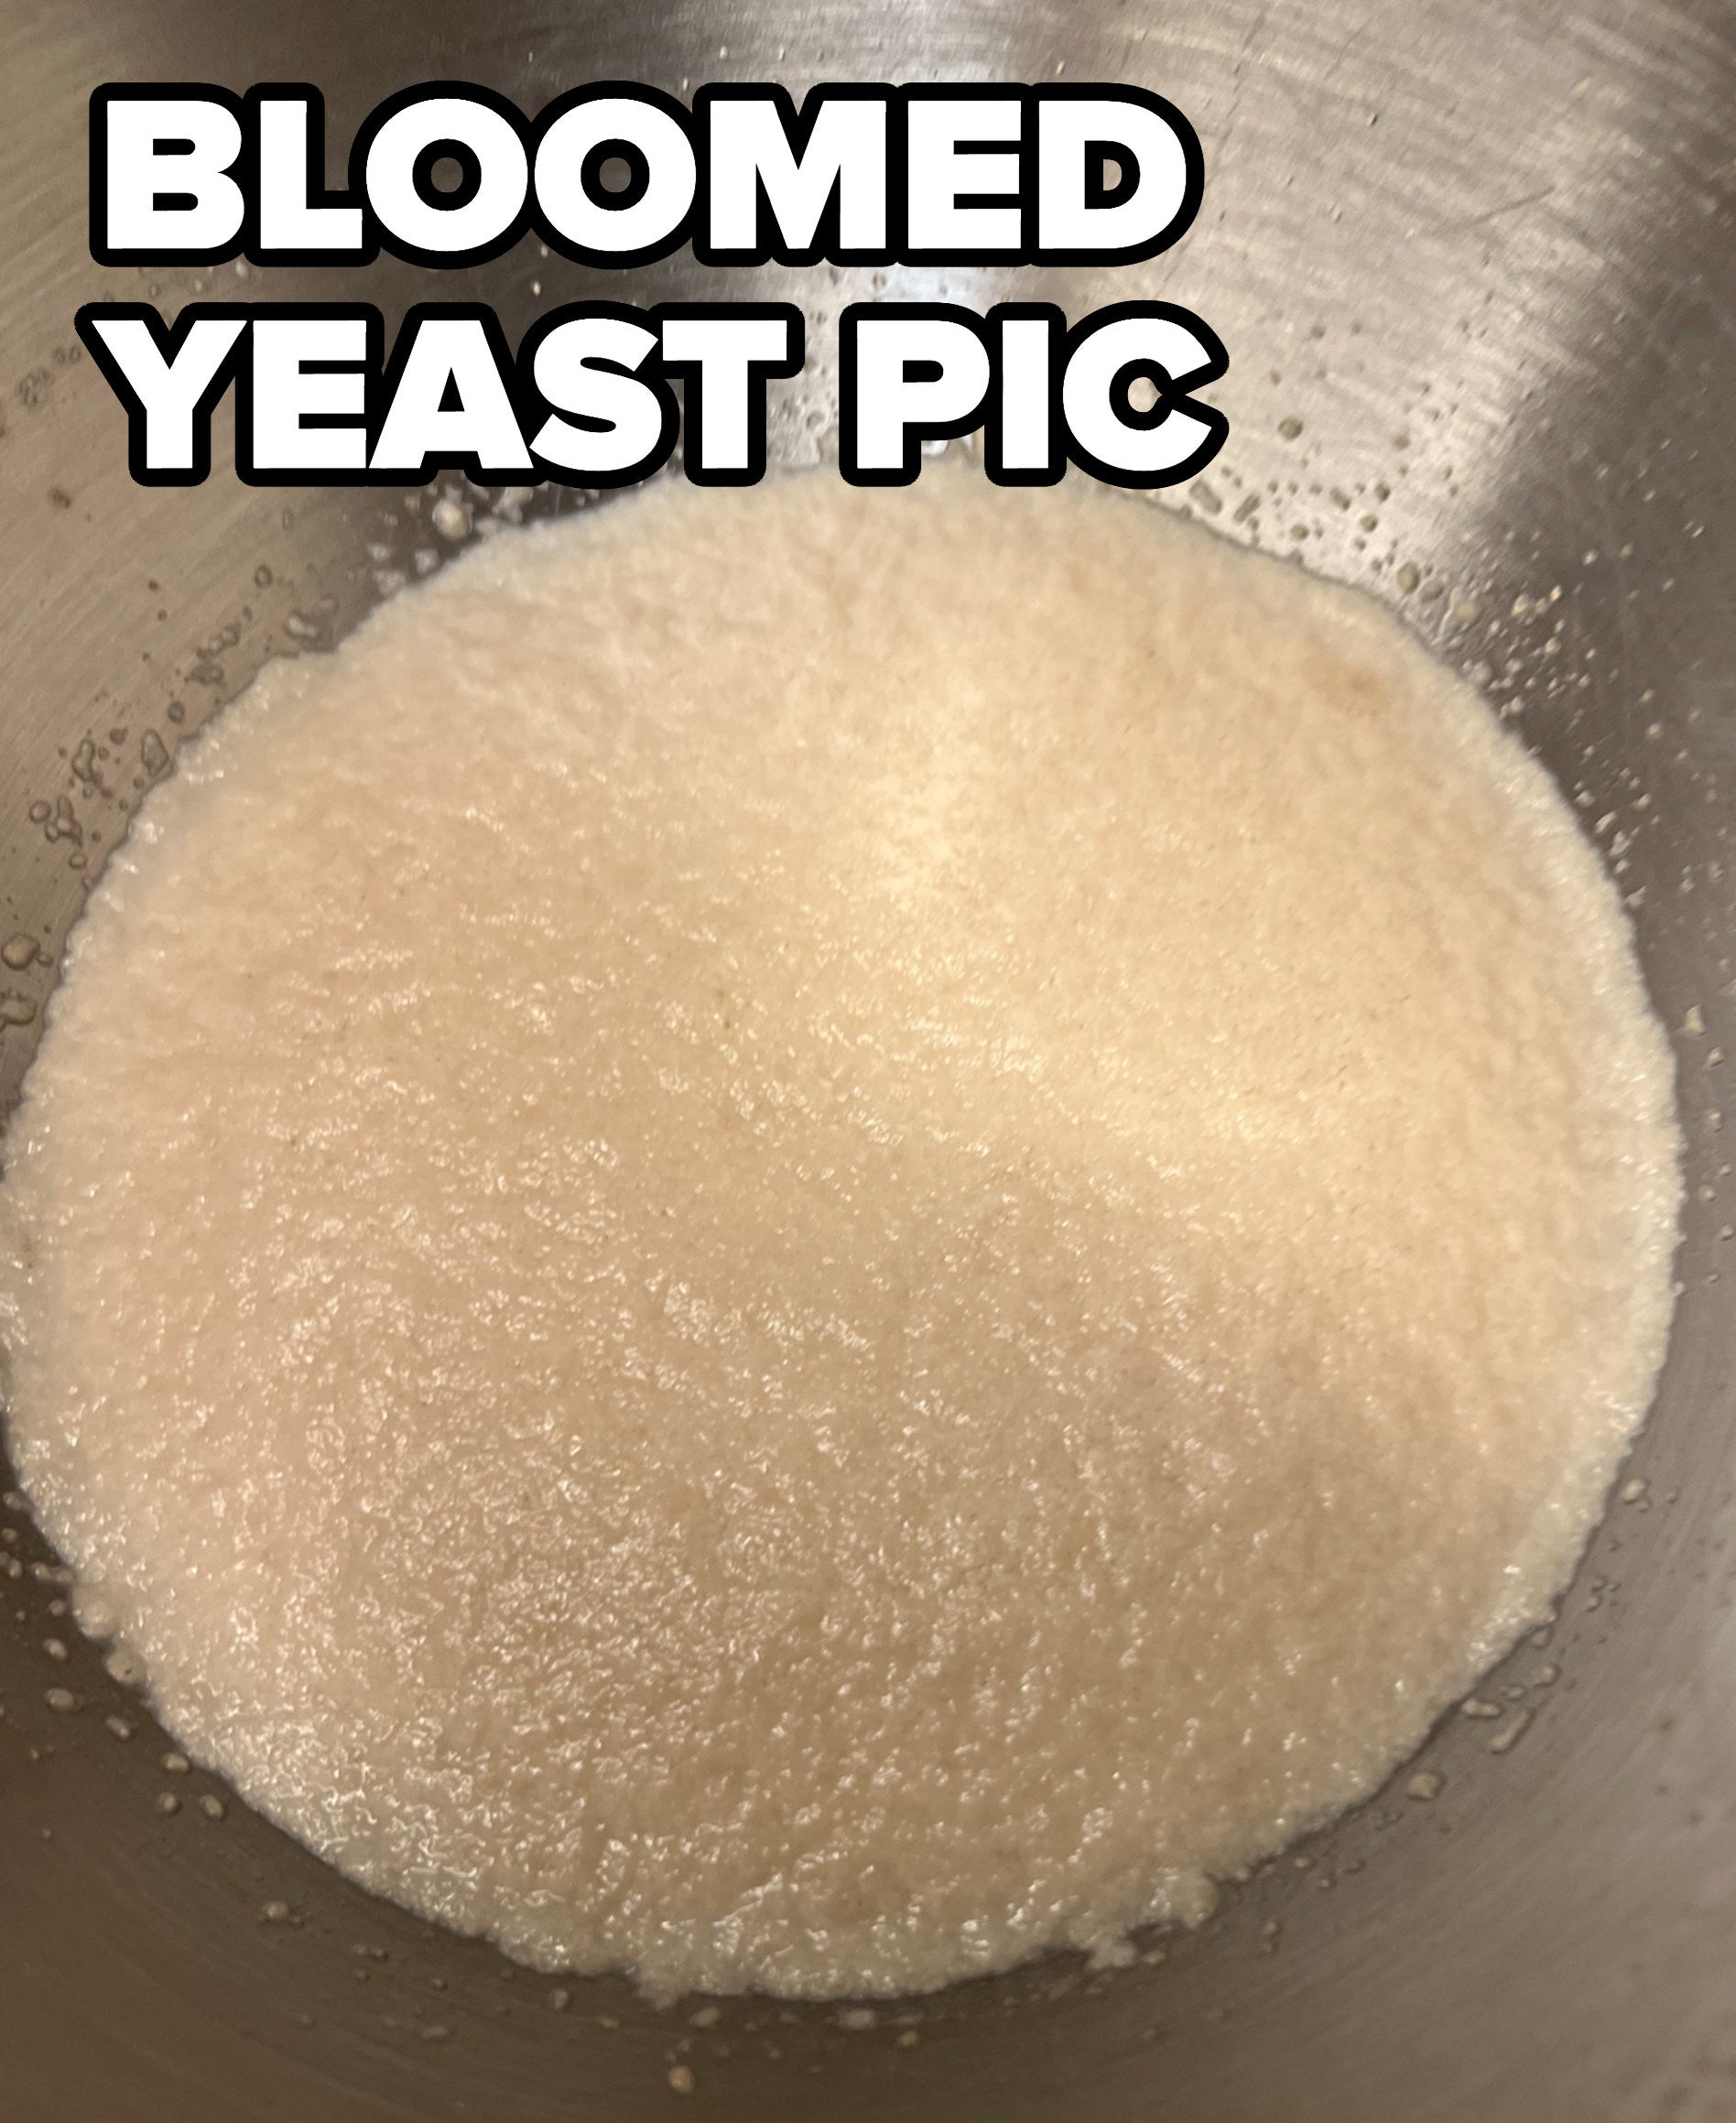 Bloomed yeast